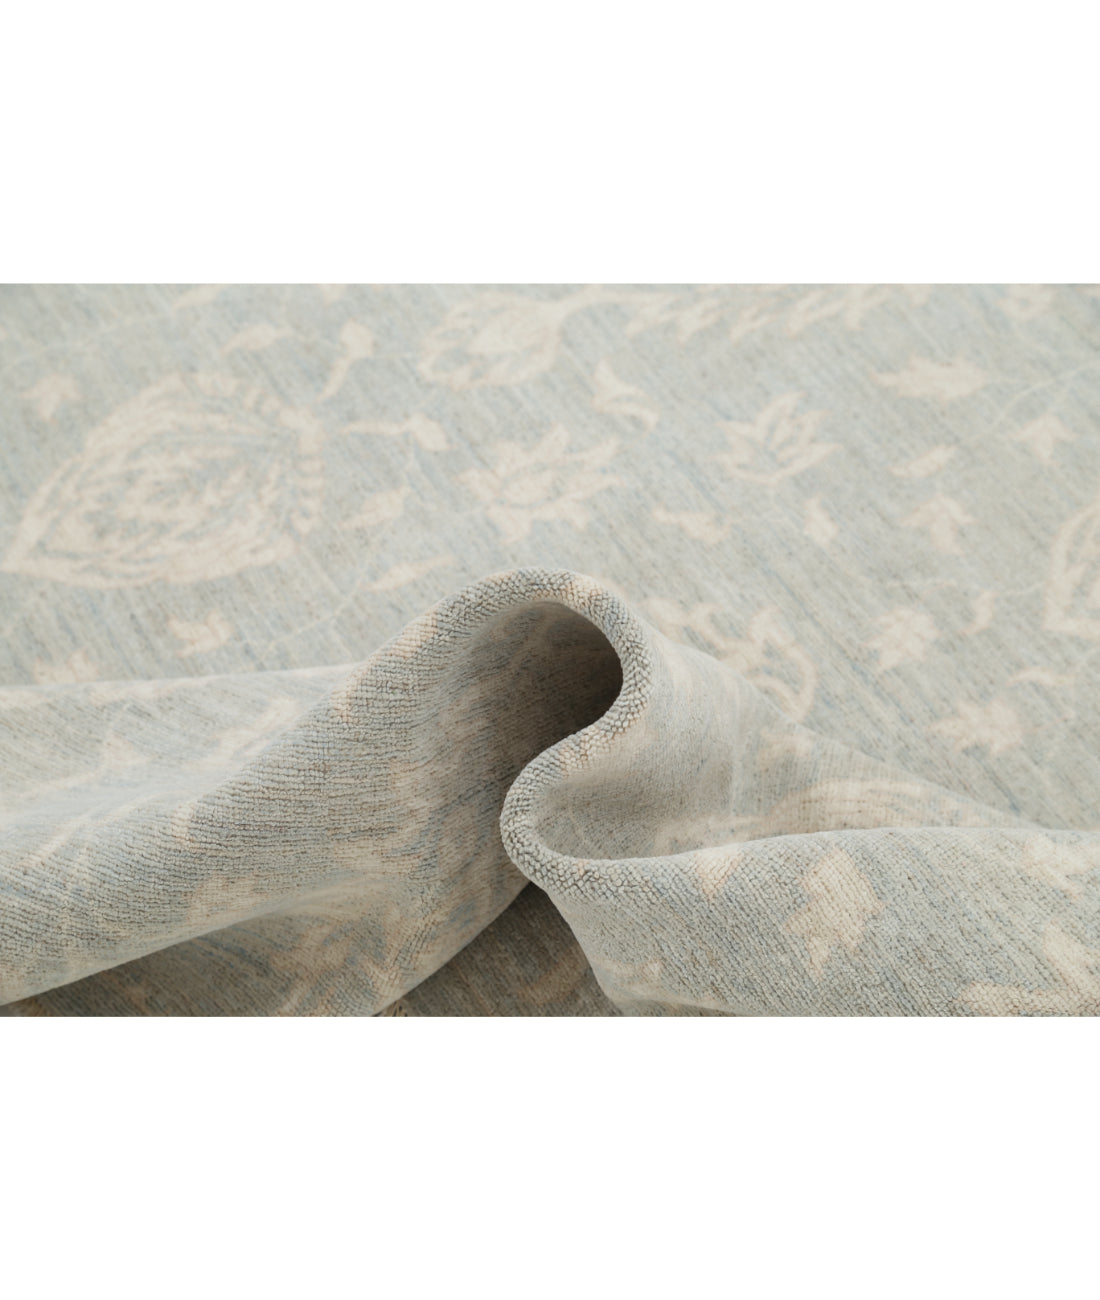 Hand Knotted Artemix Wool Rug - 6'0'' x 8'8'' 6'0'' x 8'8'' (180 X 260) / Blue / Ivory